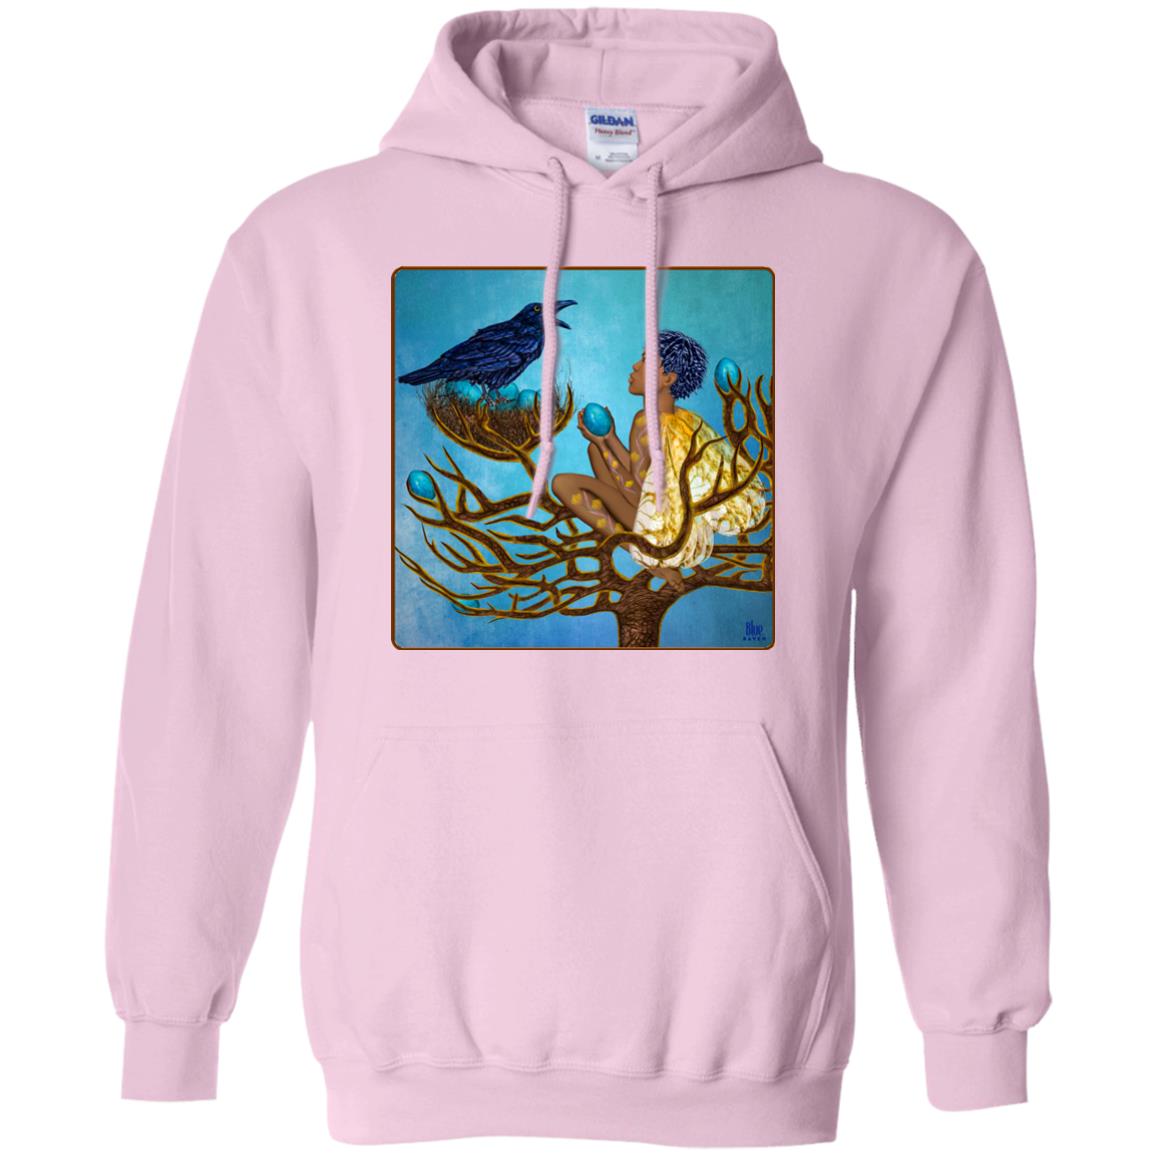 The blue raven's friend - Adult Hoodie